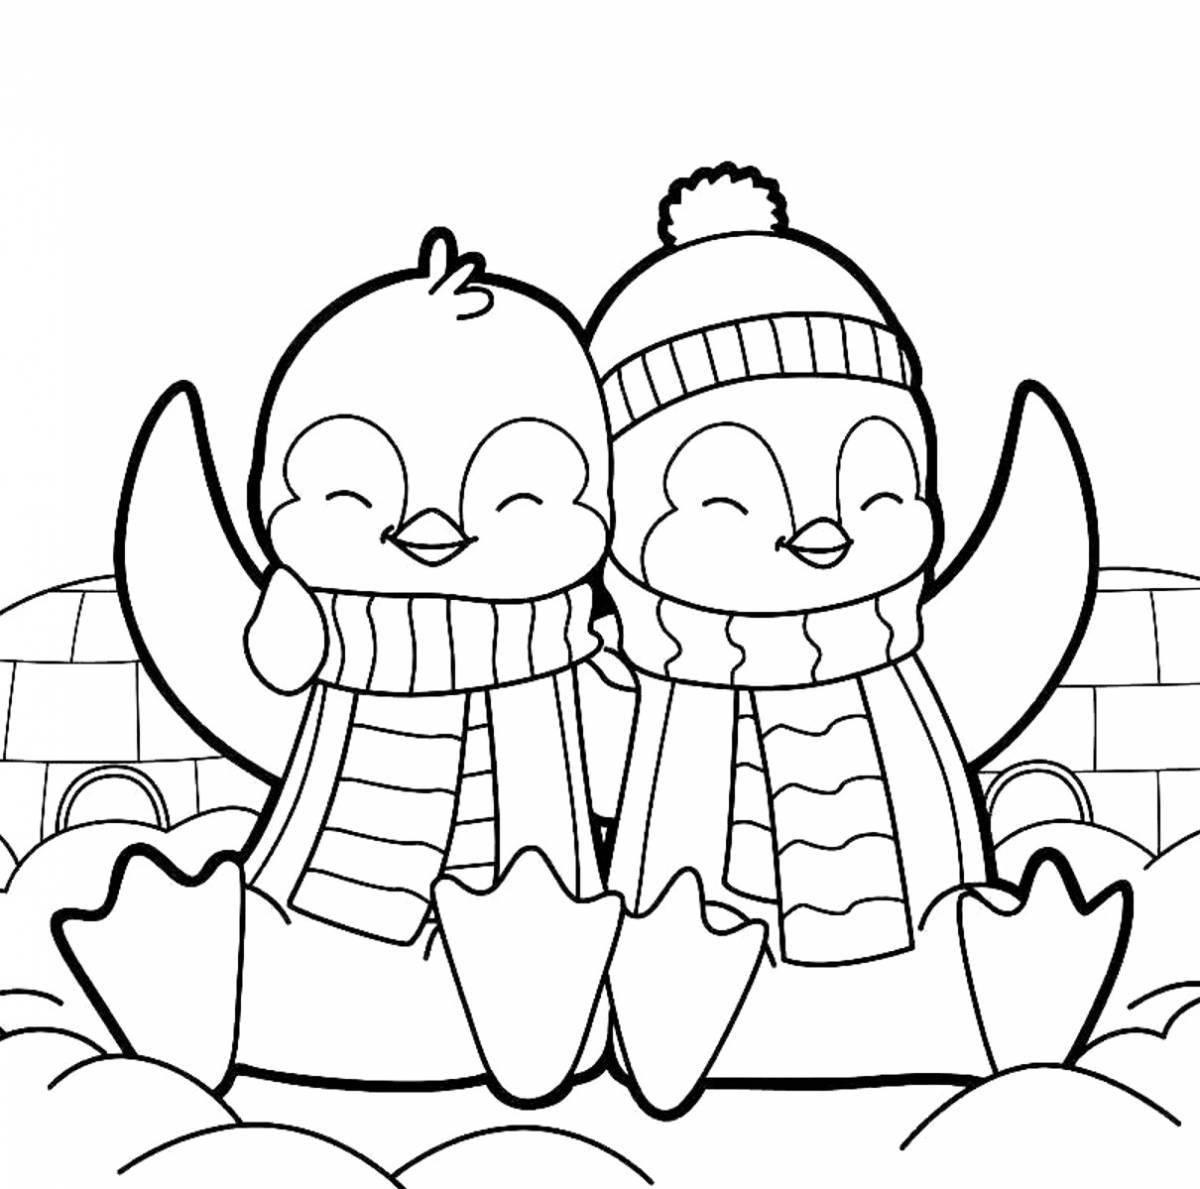 Coloring page adorable cute penguin